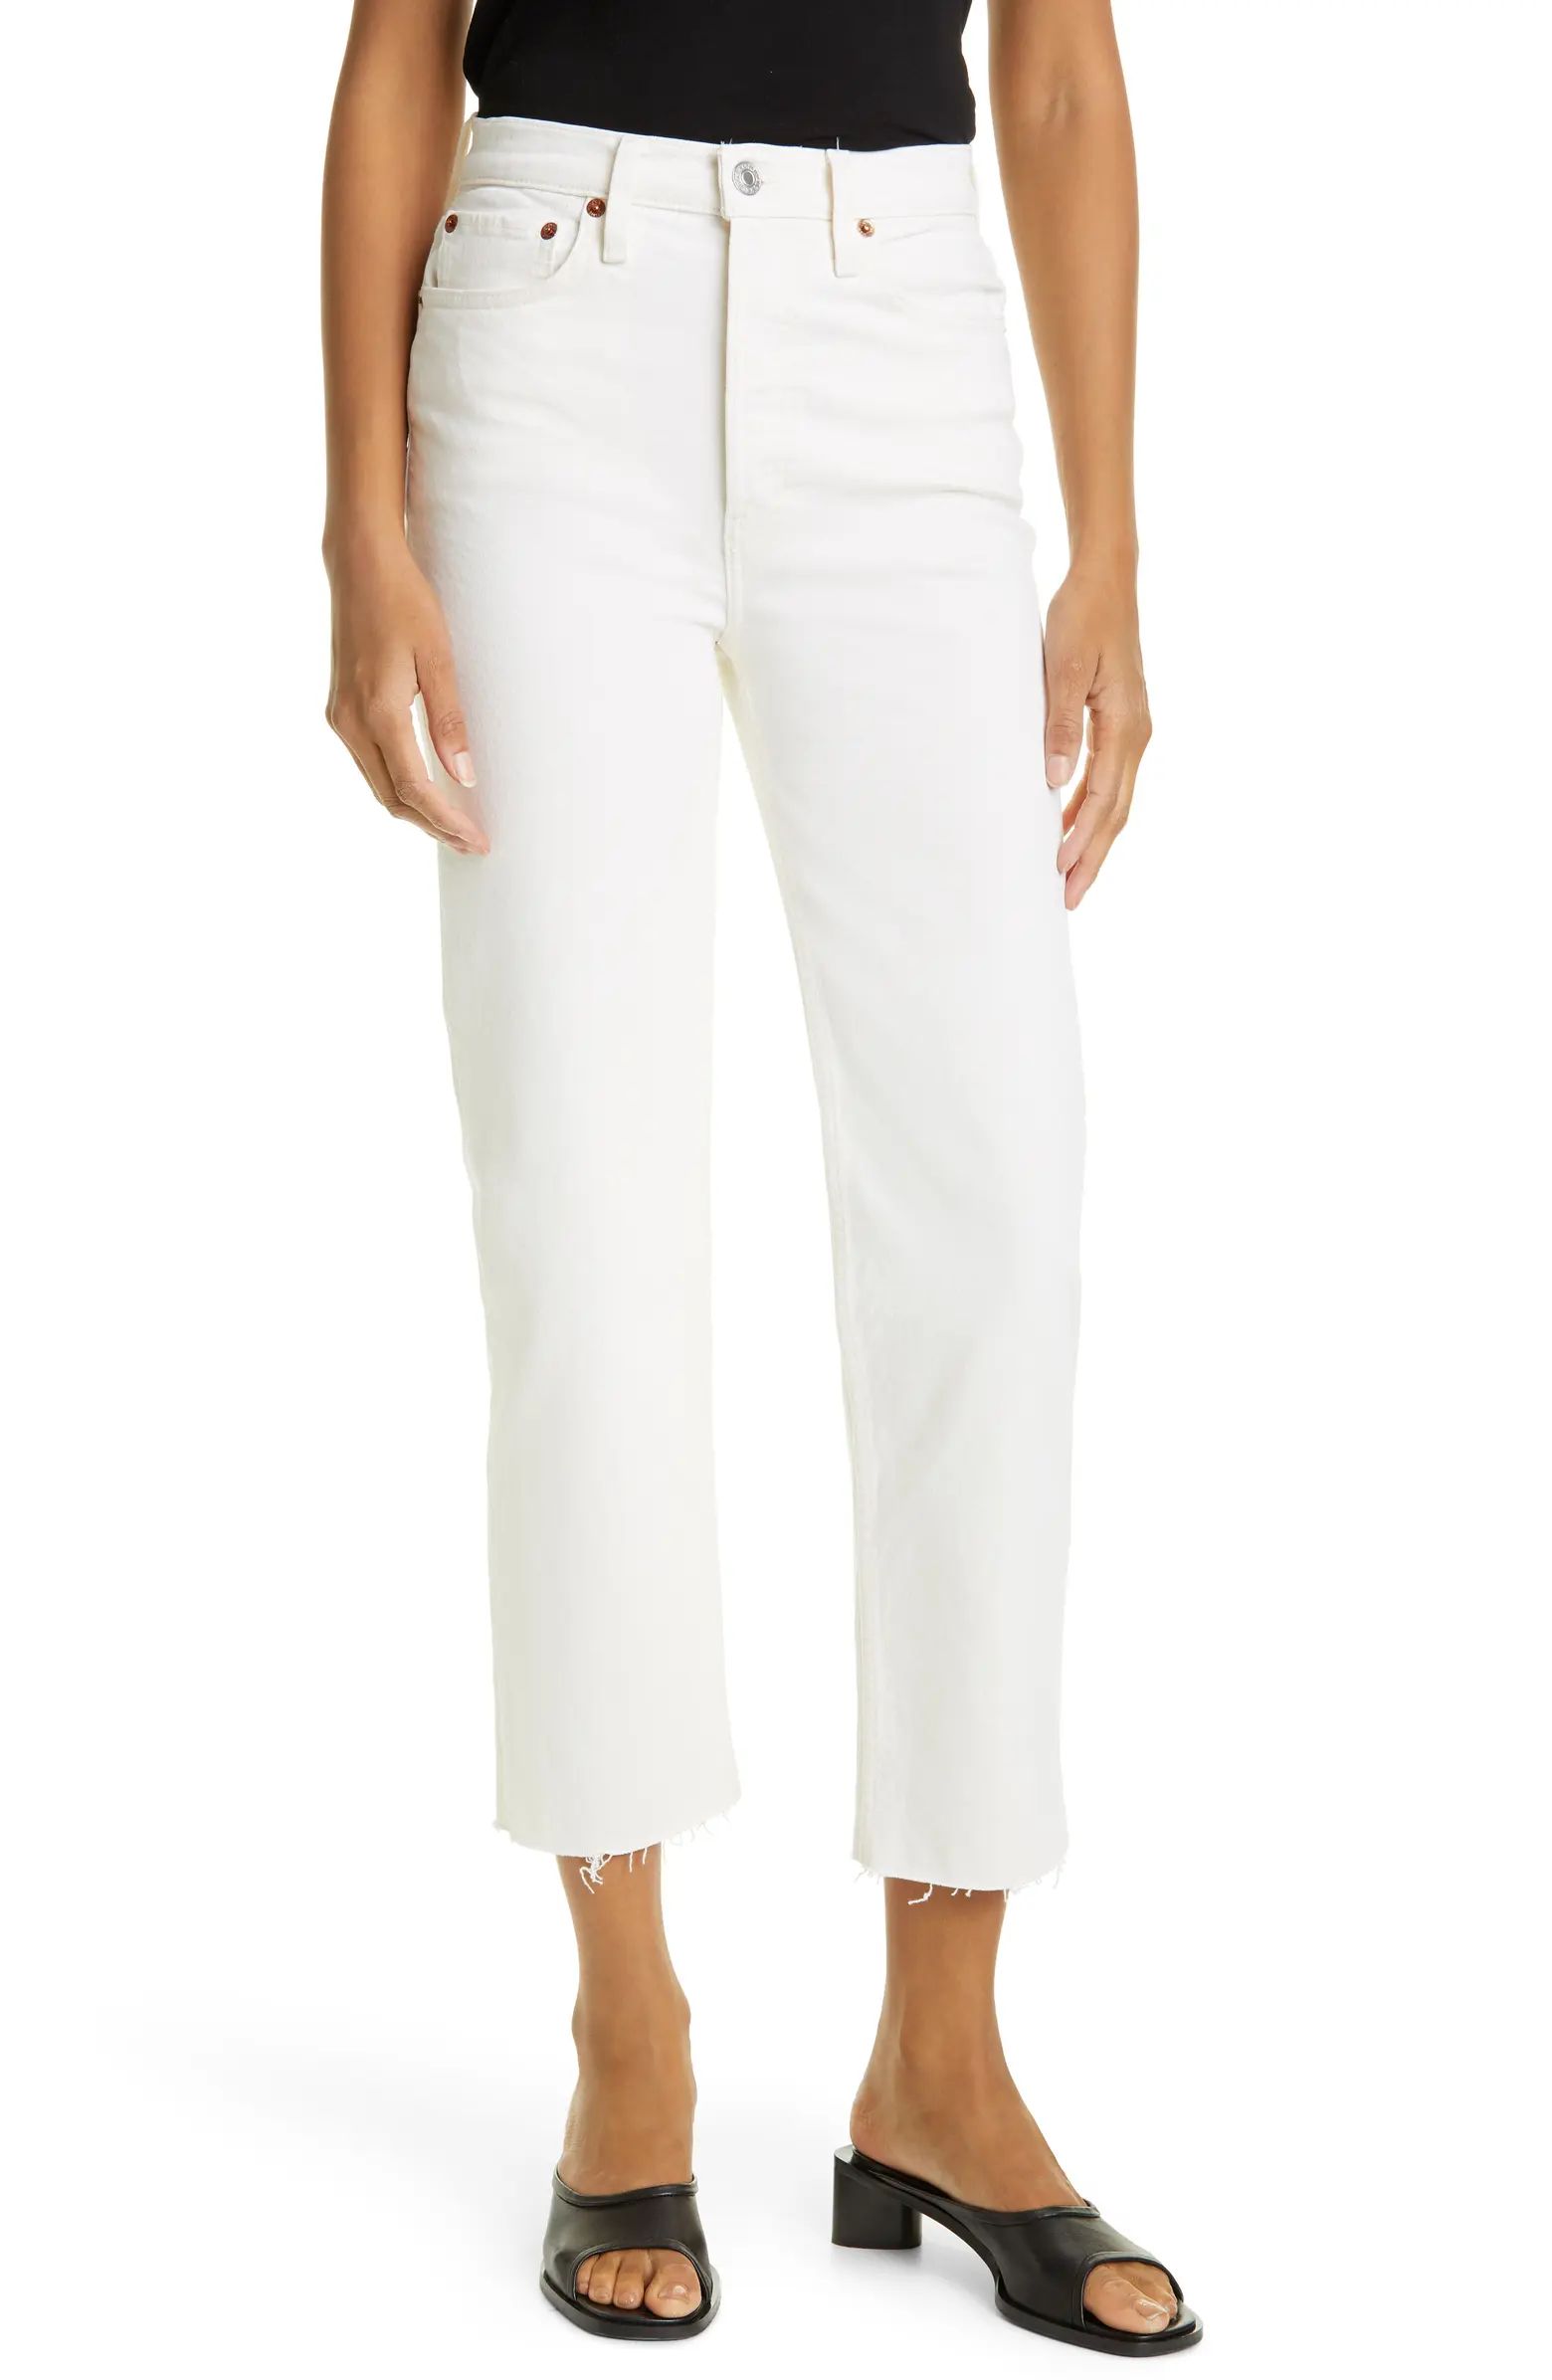 '70s Stovepipe High Waist Slim Ankle JeansRE/DONE | Nordstrom